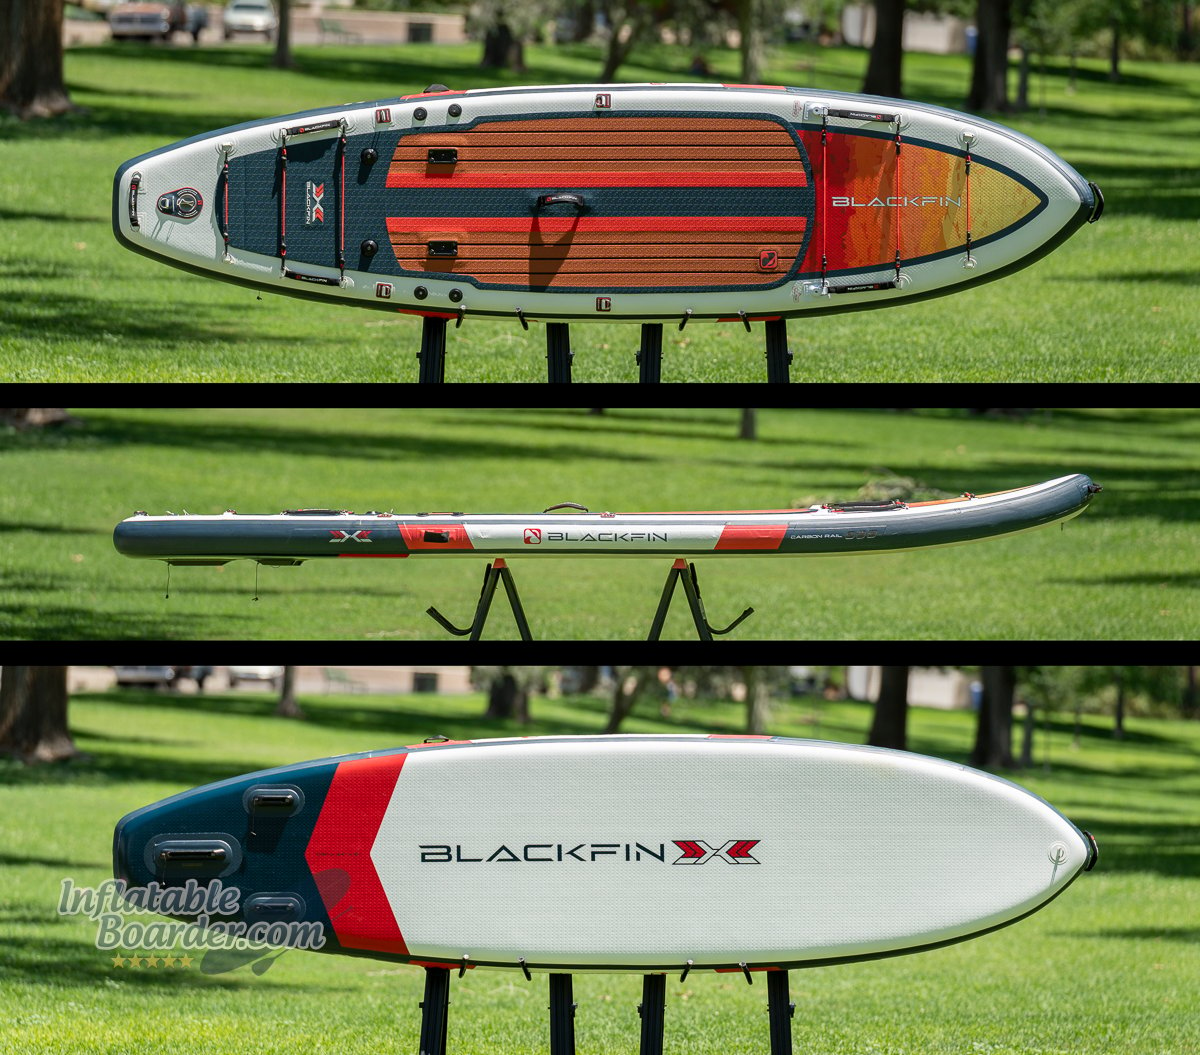 Blackfin Model XL 6.0 iSUP shape and size